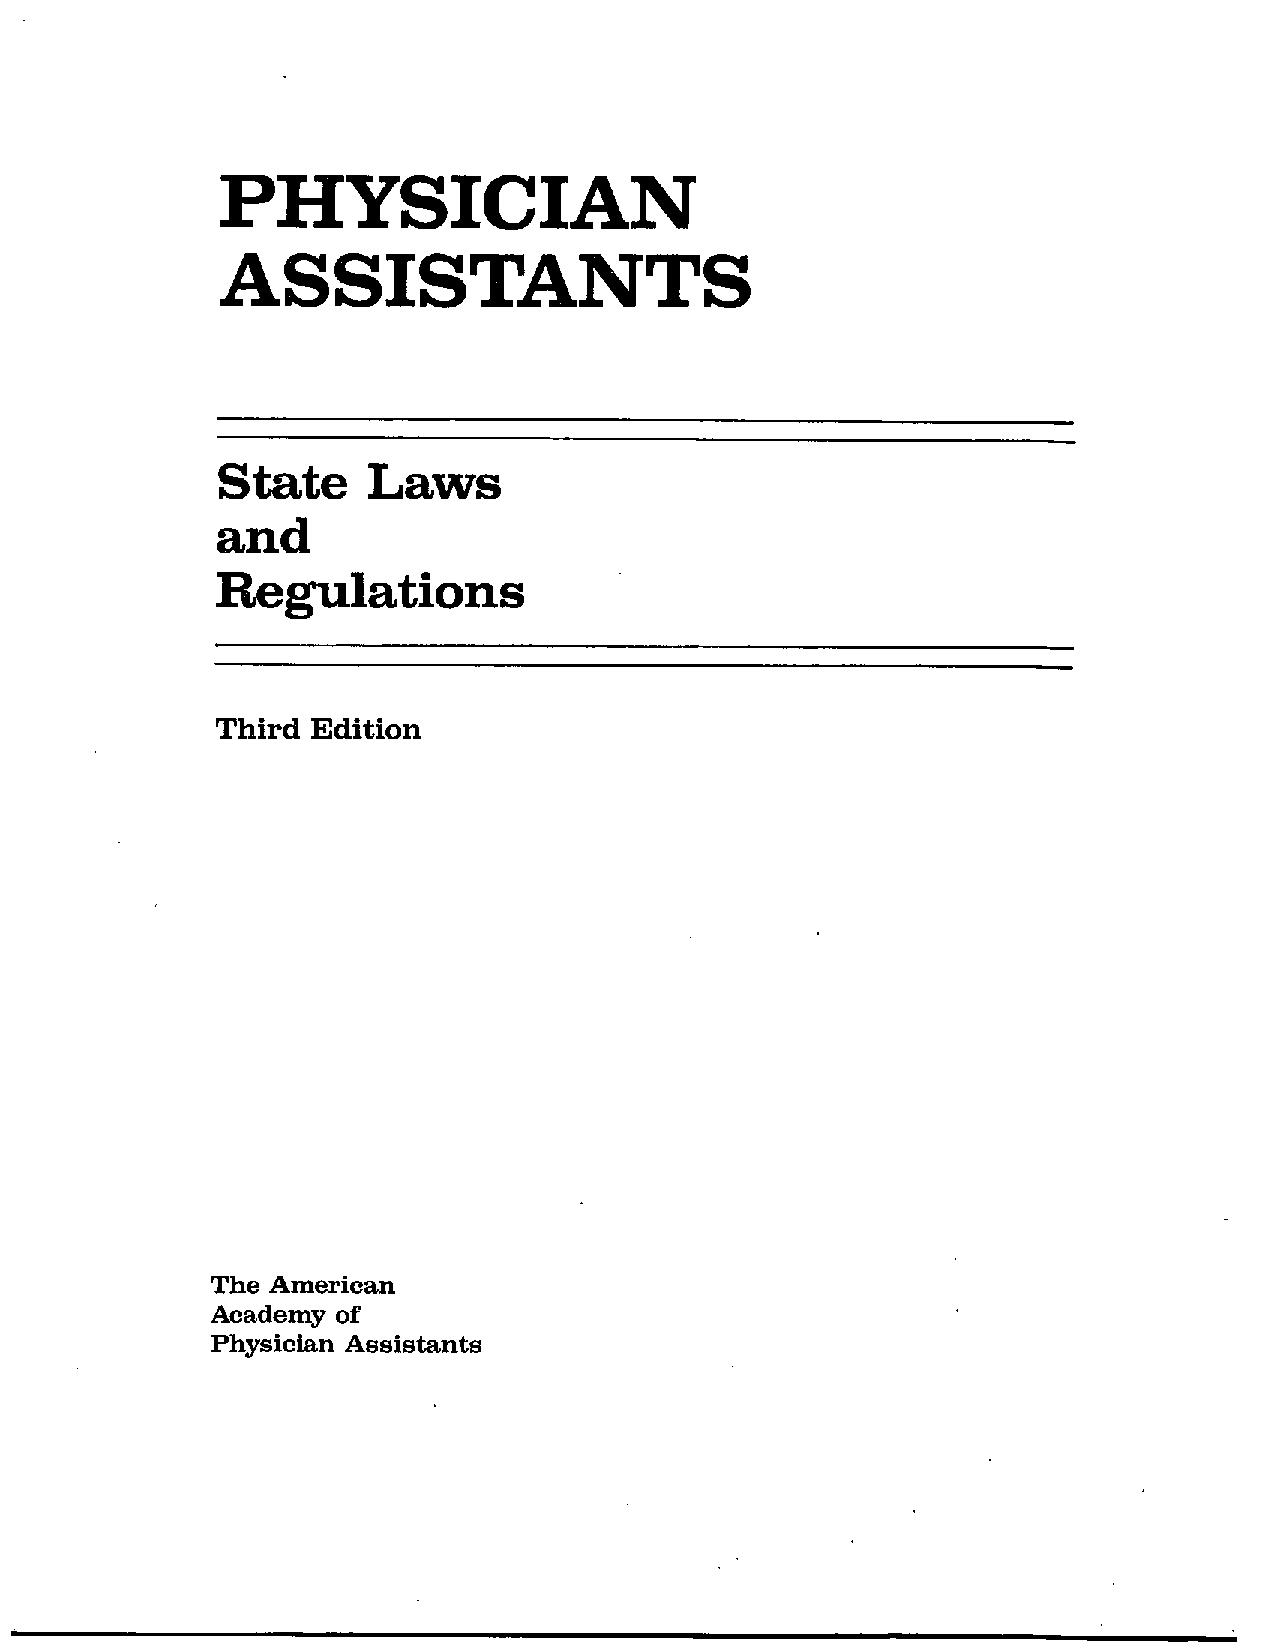 PA State Laws and Regulations 3rd Edition